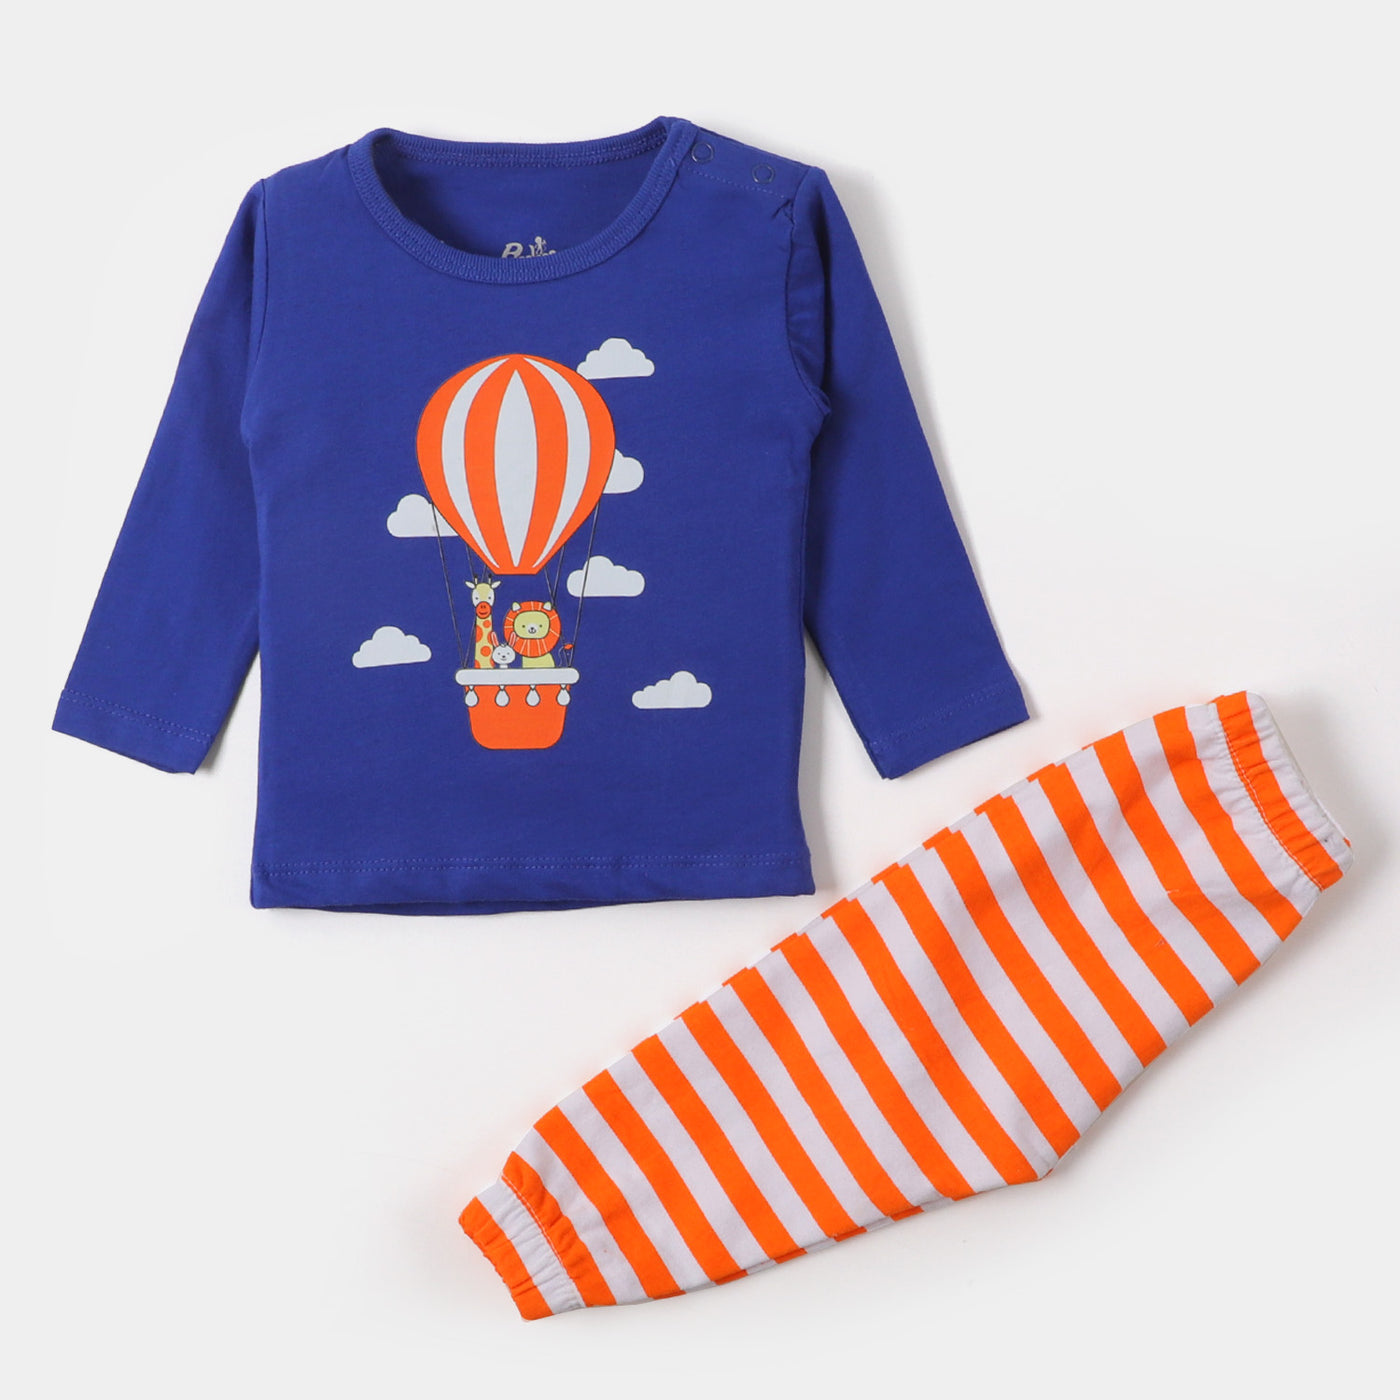 Infant Boys Knitted Suit Balloon - Navy Blue /Orange